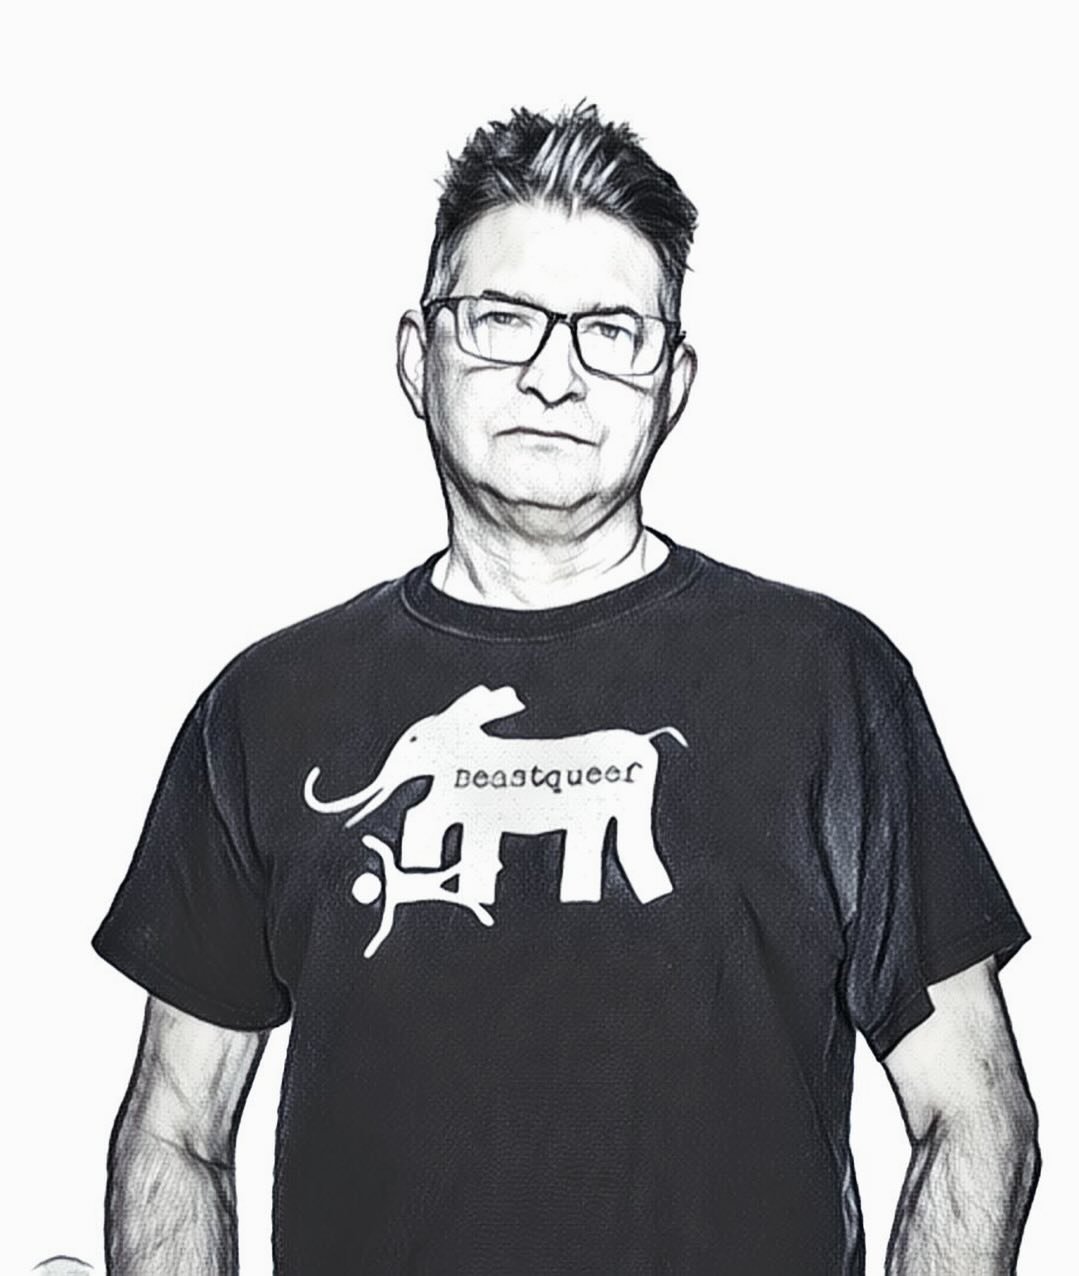 We used to play Shellac in the tour bus in the days, not to mention all the spikey killa records he produced. Proper legend gone but will never we be forgotten. RIP #SteveAlbini 🖤💔